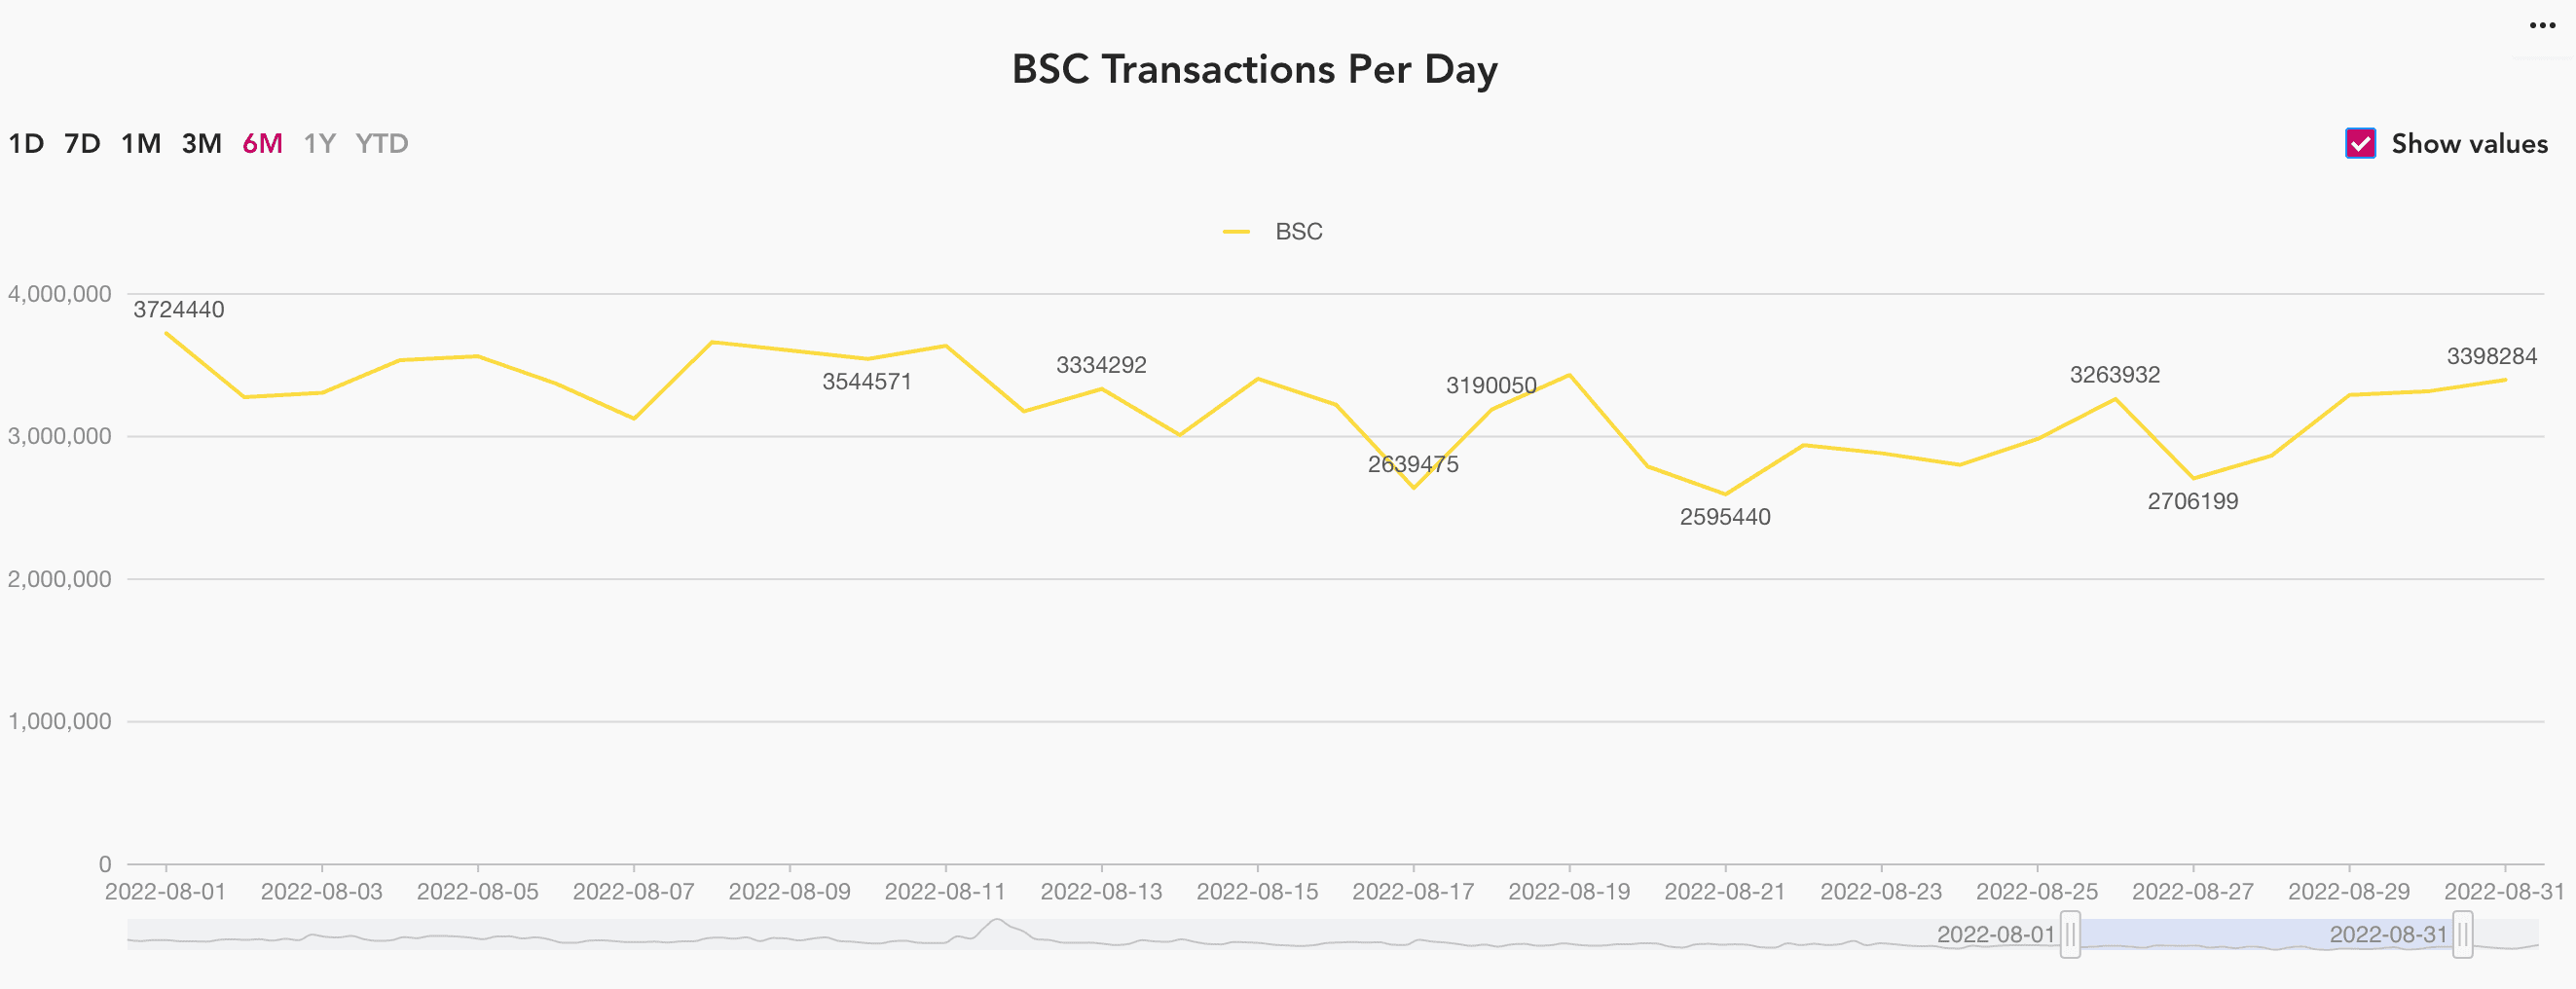 BSC transactions per day 